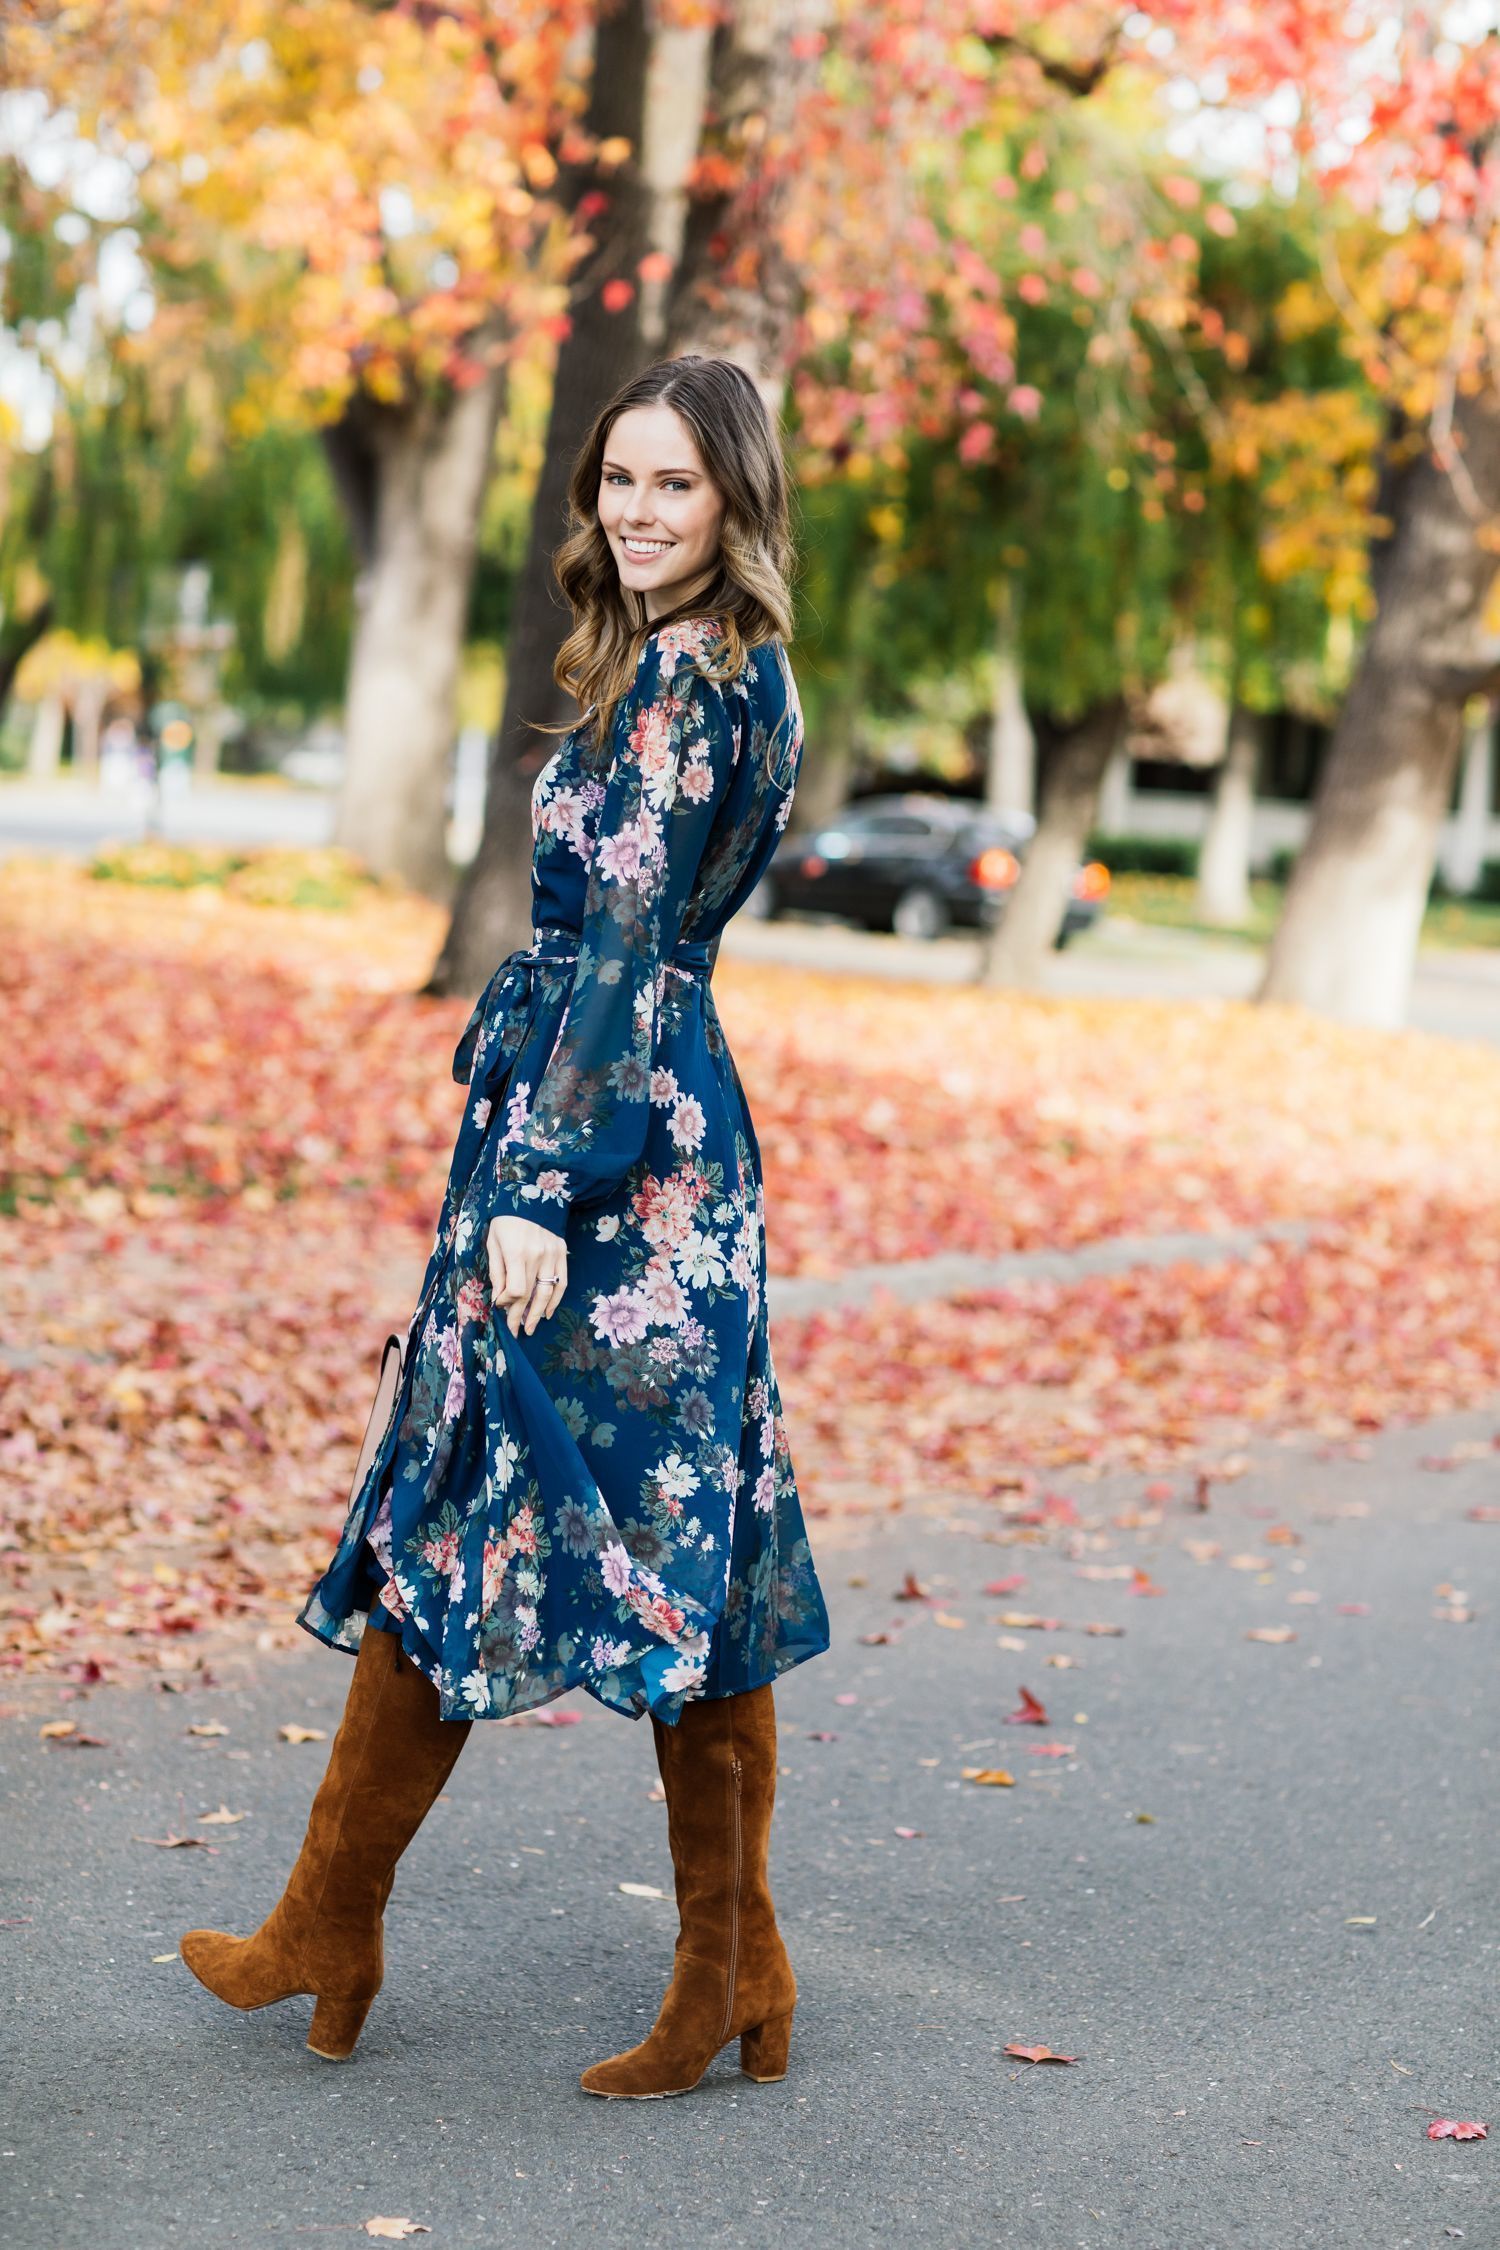 Women's Navy Floral Midi Dress, Tobacco Suede Knee High Boots